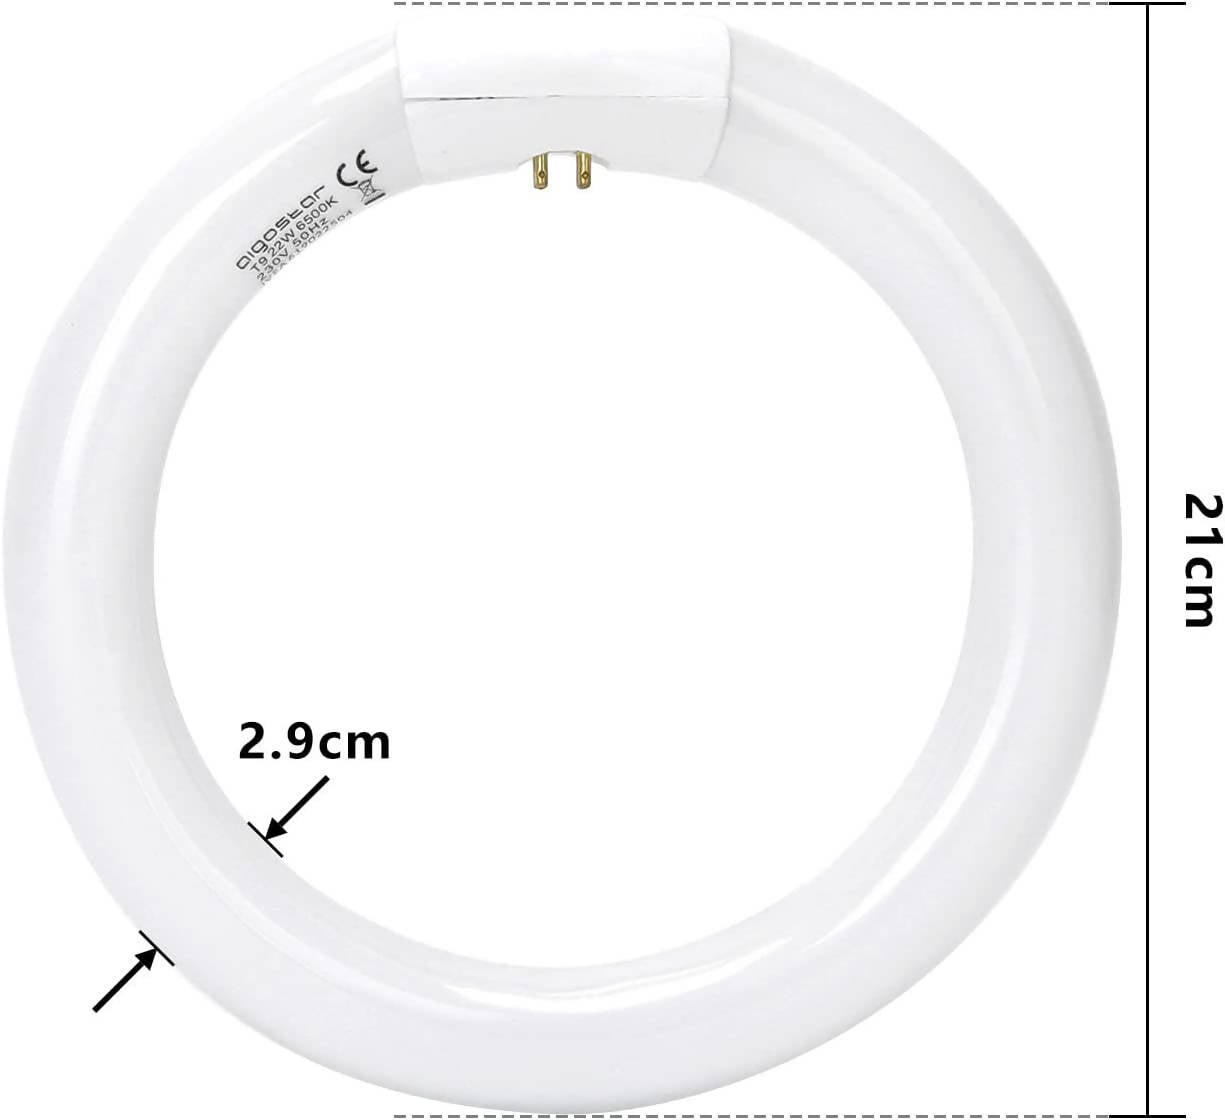 Aigostar - Fluorescent tube circular round neon tubes T9 lamp 21 cm 22 W cool white 6500 K 1200 lm G10Q socket bright fluorescent tube for ring lamp. [Energy Class A]